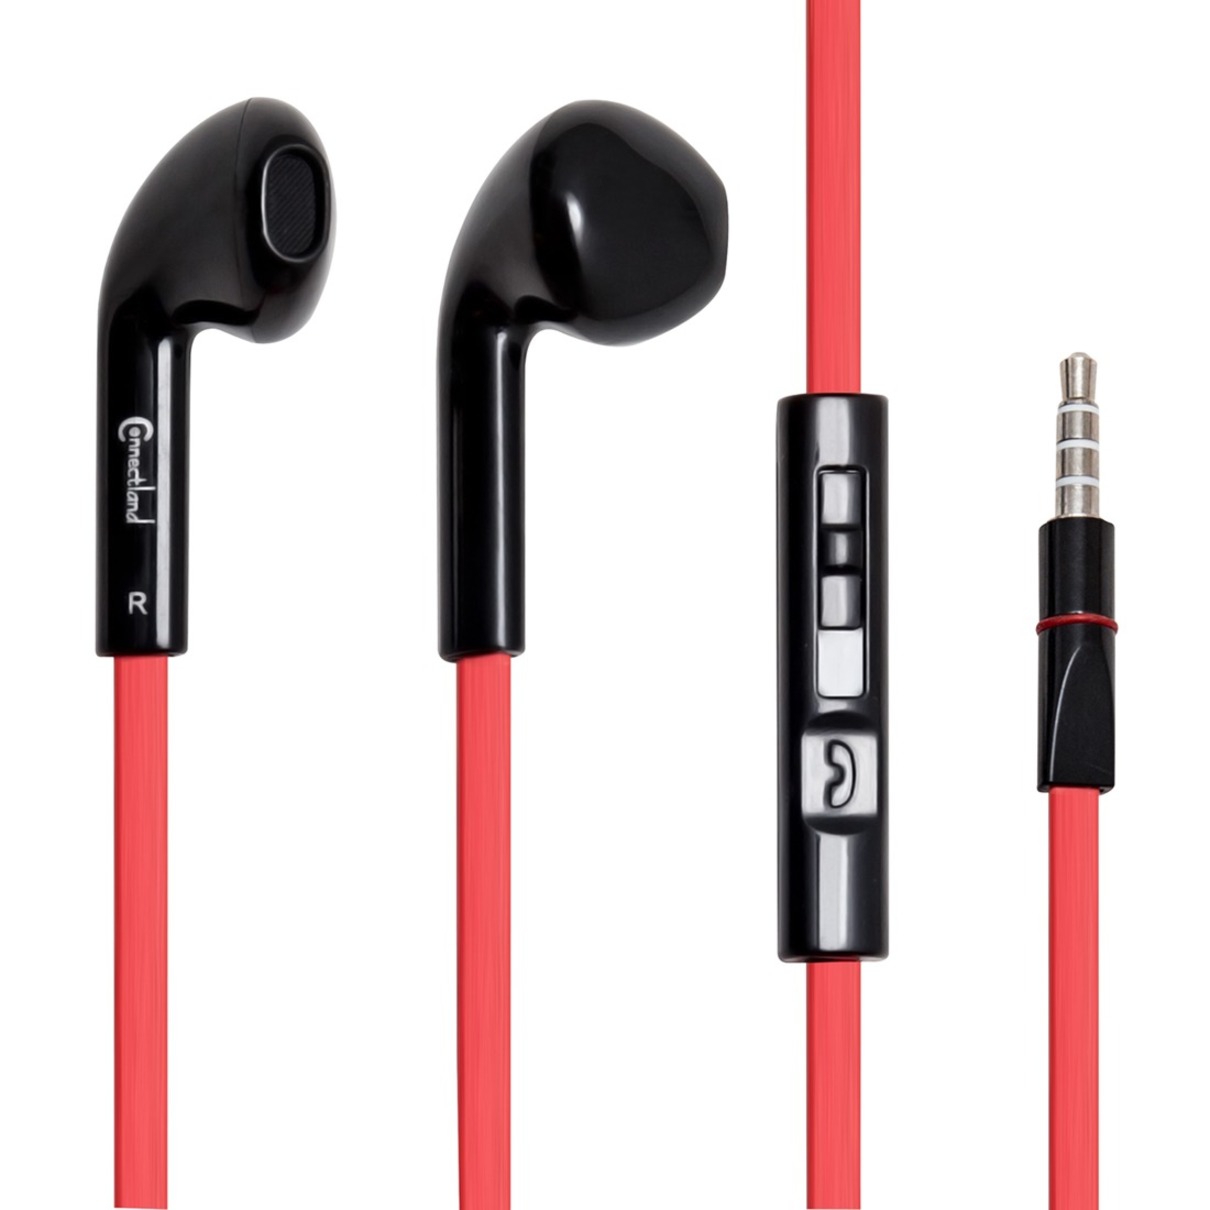 SYBA Multimedia Connectland In-Ear Earphone with In-Line Microphone, and Call Control- Red/Black - image 1 of 2